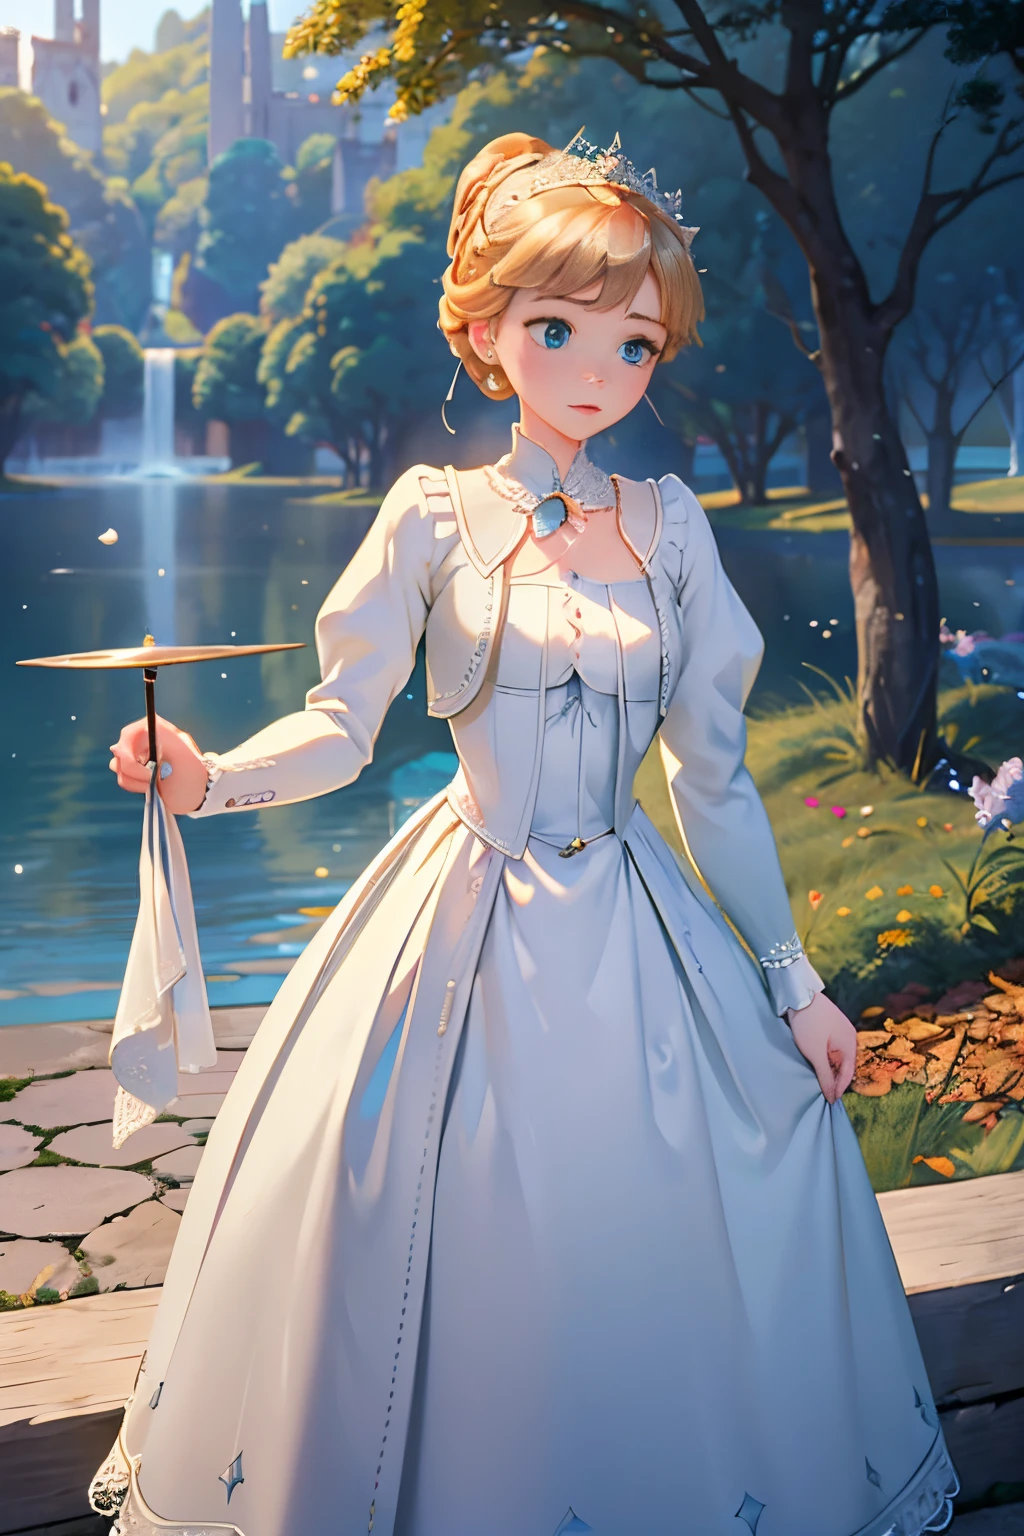 IImagine fifteen-year-old Virginia Otis, a blonde woman with blue eyes, standing near a majestic ancient oak tree. She wears a modest but elegant white summer Victorian dress, adorned with subtle lace accents. A pair of classic pearl earrings graze her delicate ears, while she holds a copy of Charles Dickens' novel “A Christmas Carol.” In her left hand, she holds a magnifying glass, a symbol of her unwavering dedication to seeking the truths behind ghostly events. Surrounded by the serenity of nature and the enigmas of history, this image of her portrays her unique mix of intellect and romanticism.